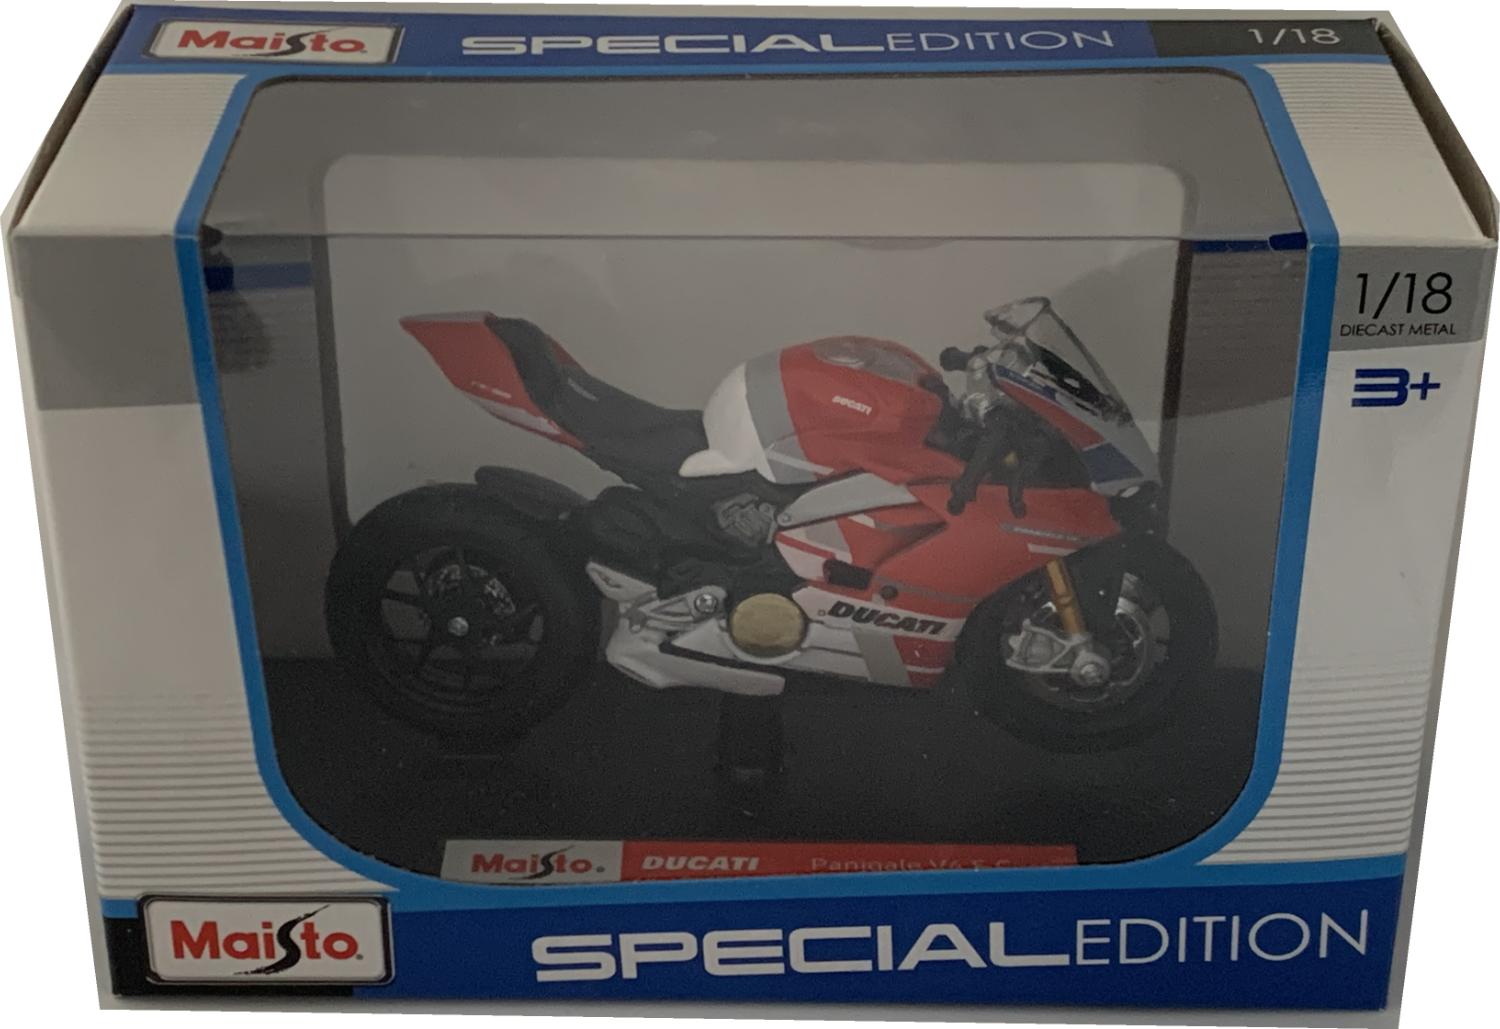 Ducati Panigale V4 S Corse in red, white and grey 1:18 scale model from Maisto